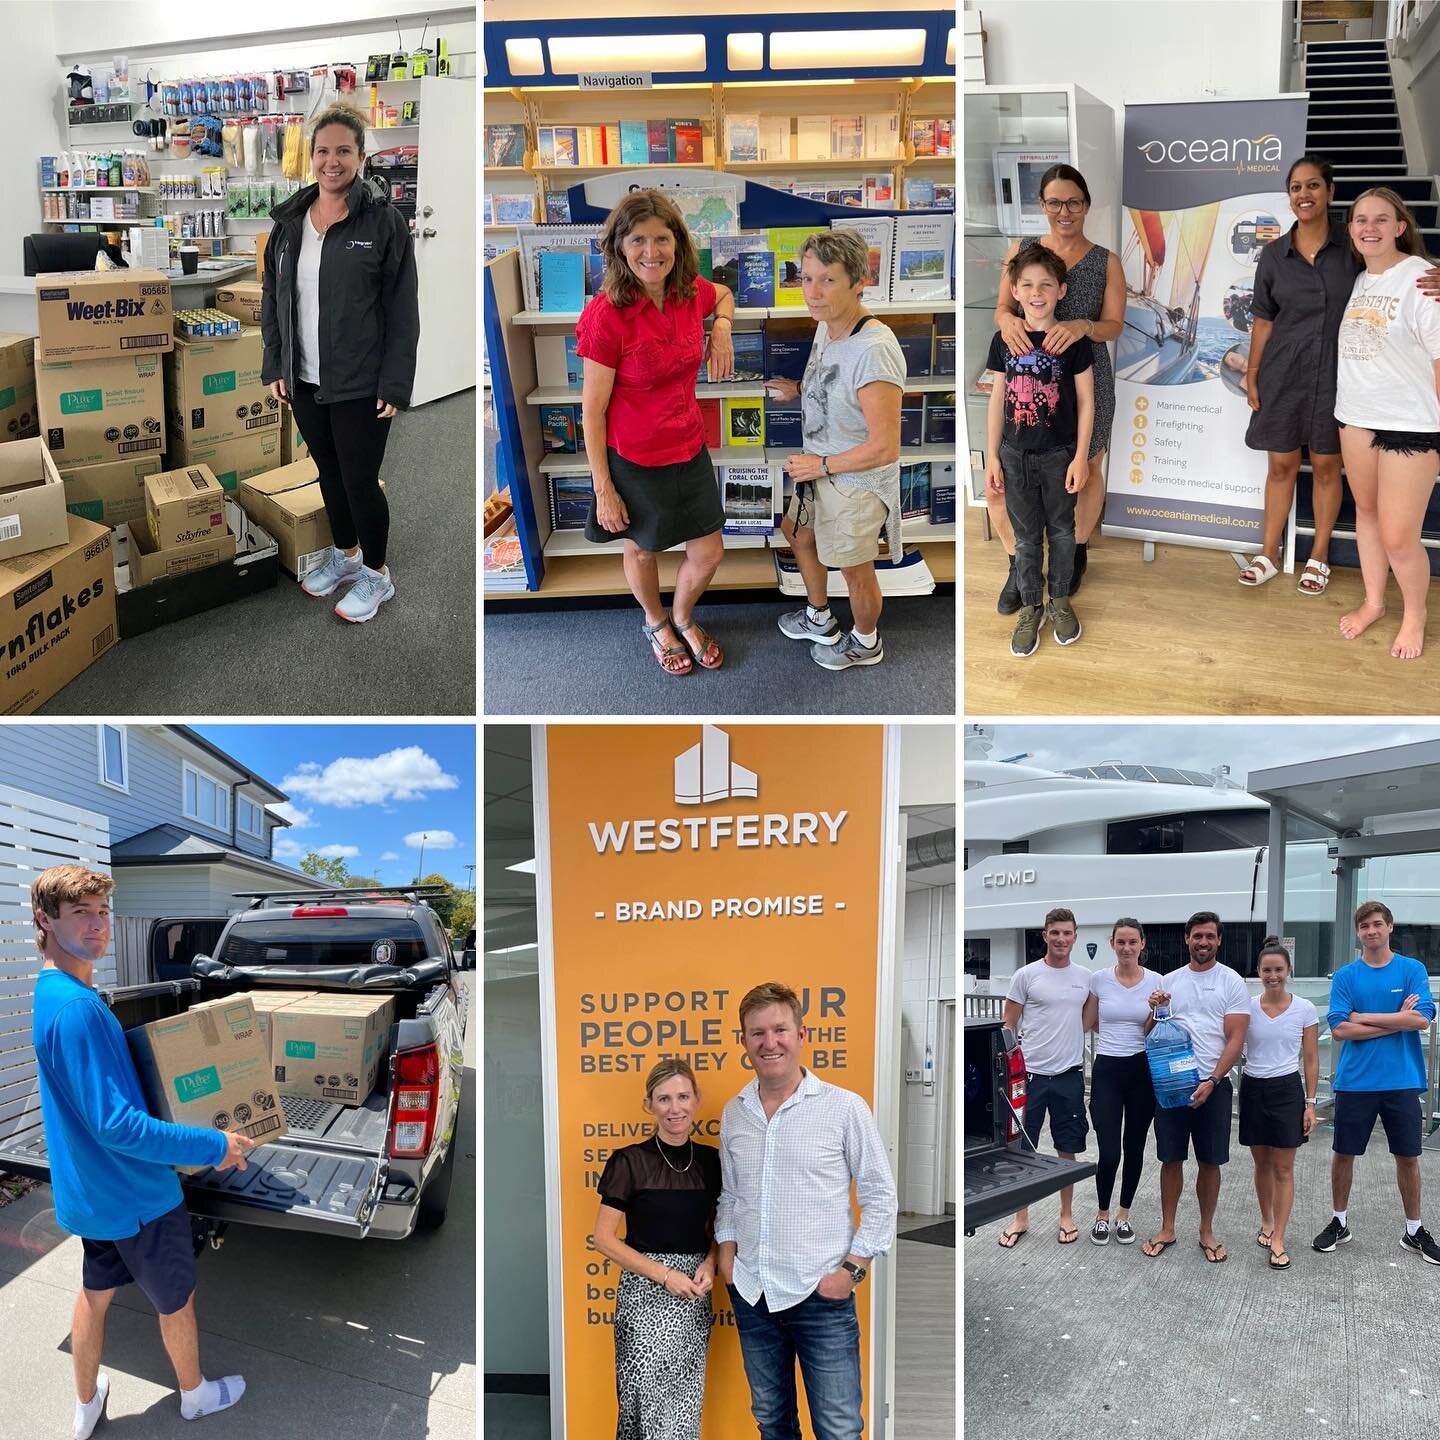 We would like to extend a huge heartfelt thank you to the New Zealand and wider Marine Community for all the kind contributions and support to date. We continue to receive pledges to assist and deliveries of goods to our collection point in Auckland&